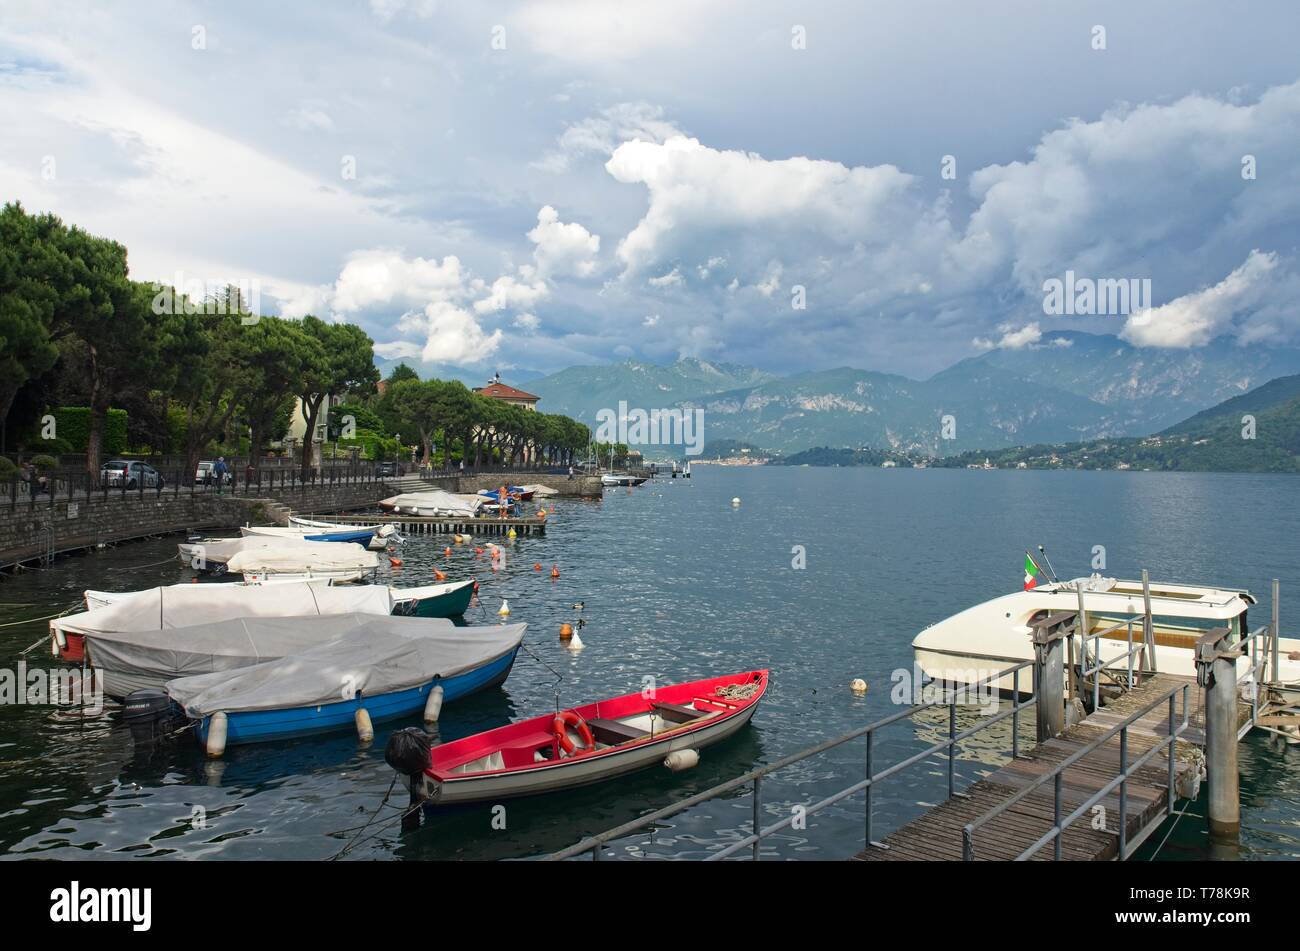 A view across Lenno harbour across Lake Como towards Bellagio in the distance with mountains beyond, under a moody grey sky Stock Photo